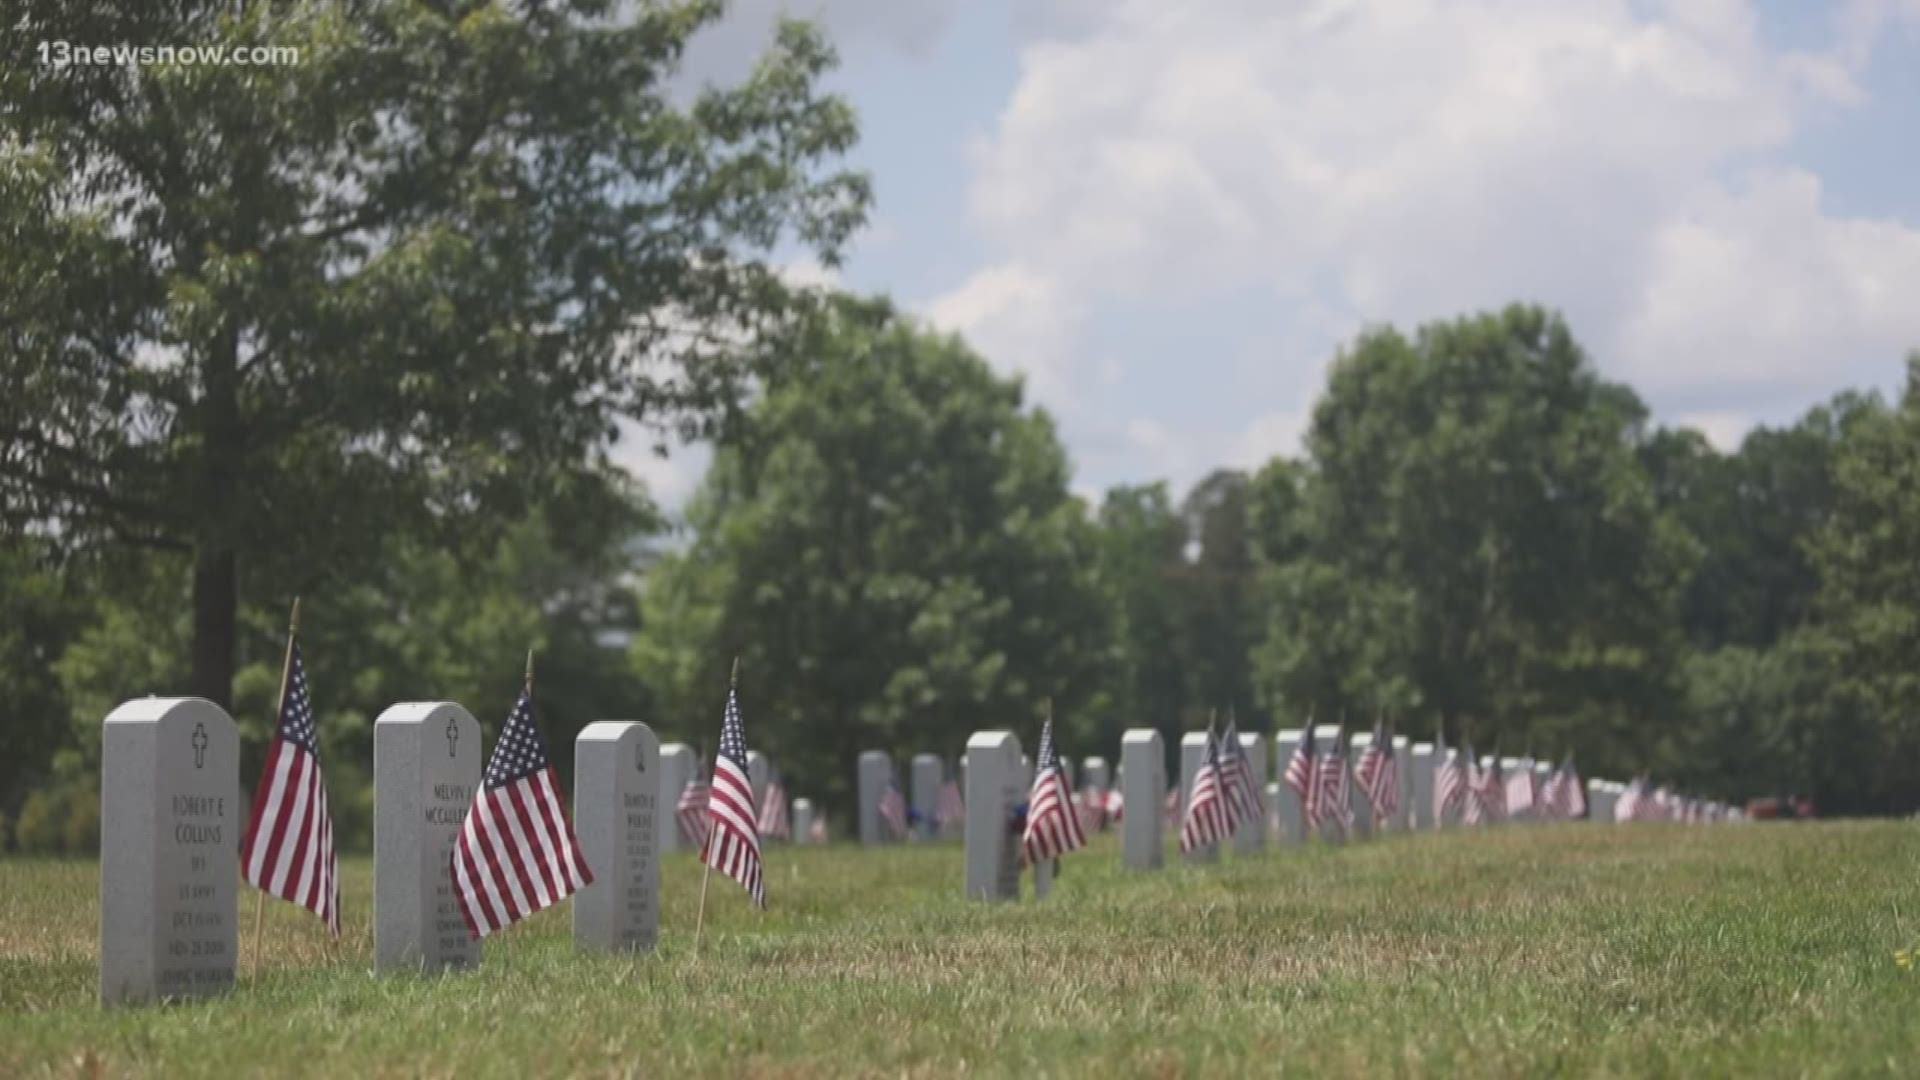 Memorial Day is a day to remember fallen service members, but for some military families it's a day to honor and remember their fallen loved ones.